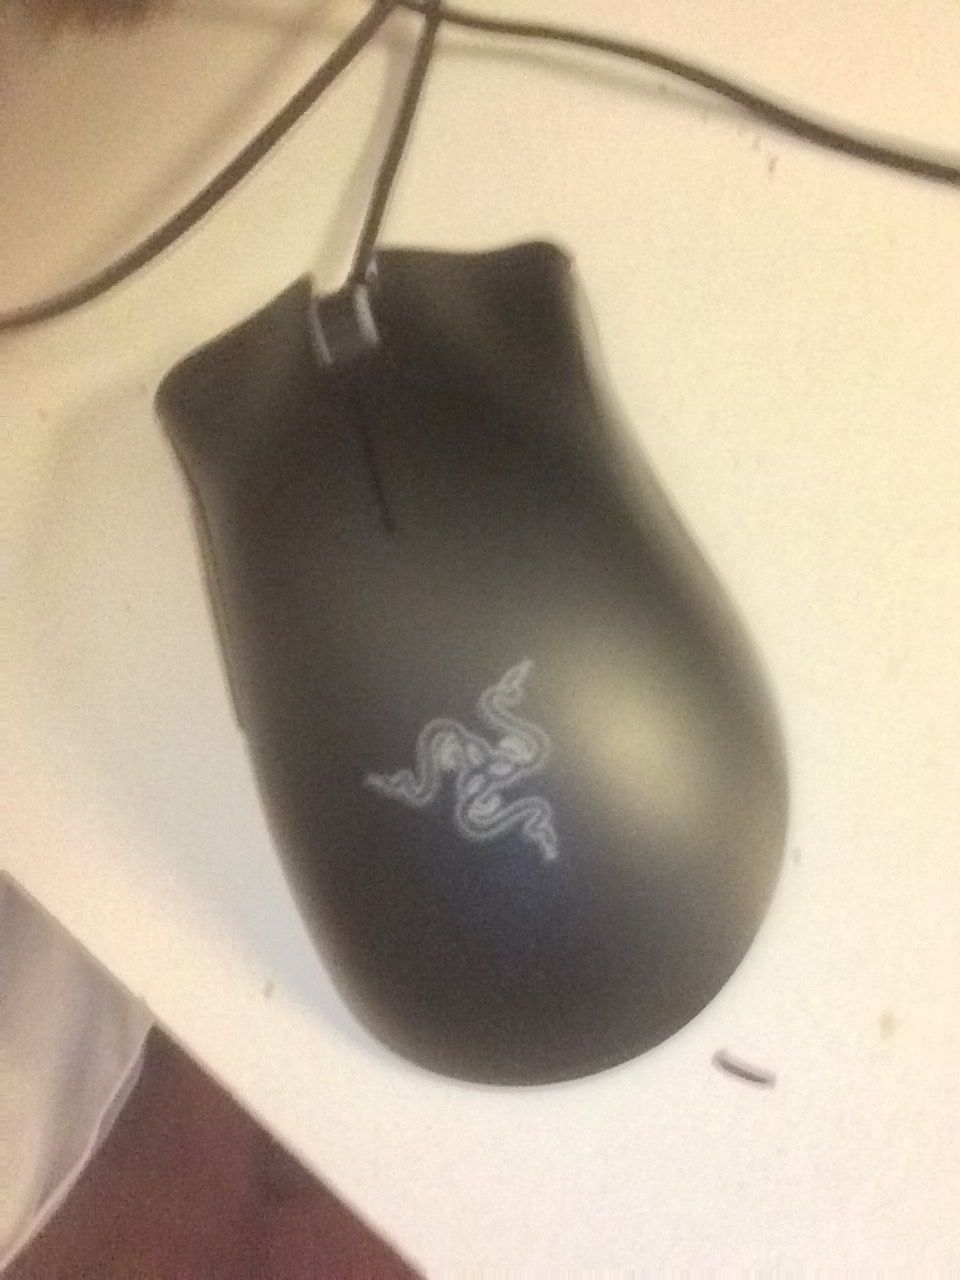 Razed DeathAdder Essential Gaming Mouse.(used)No box with it.